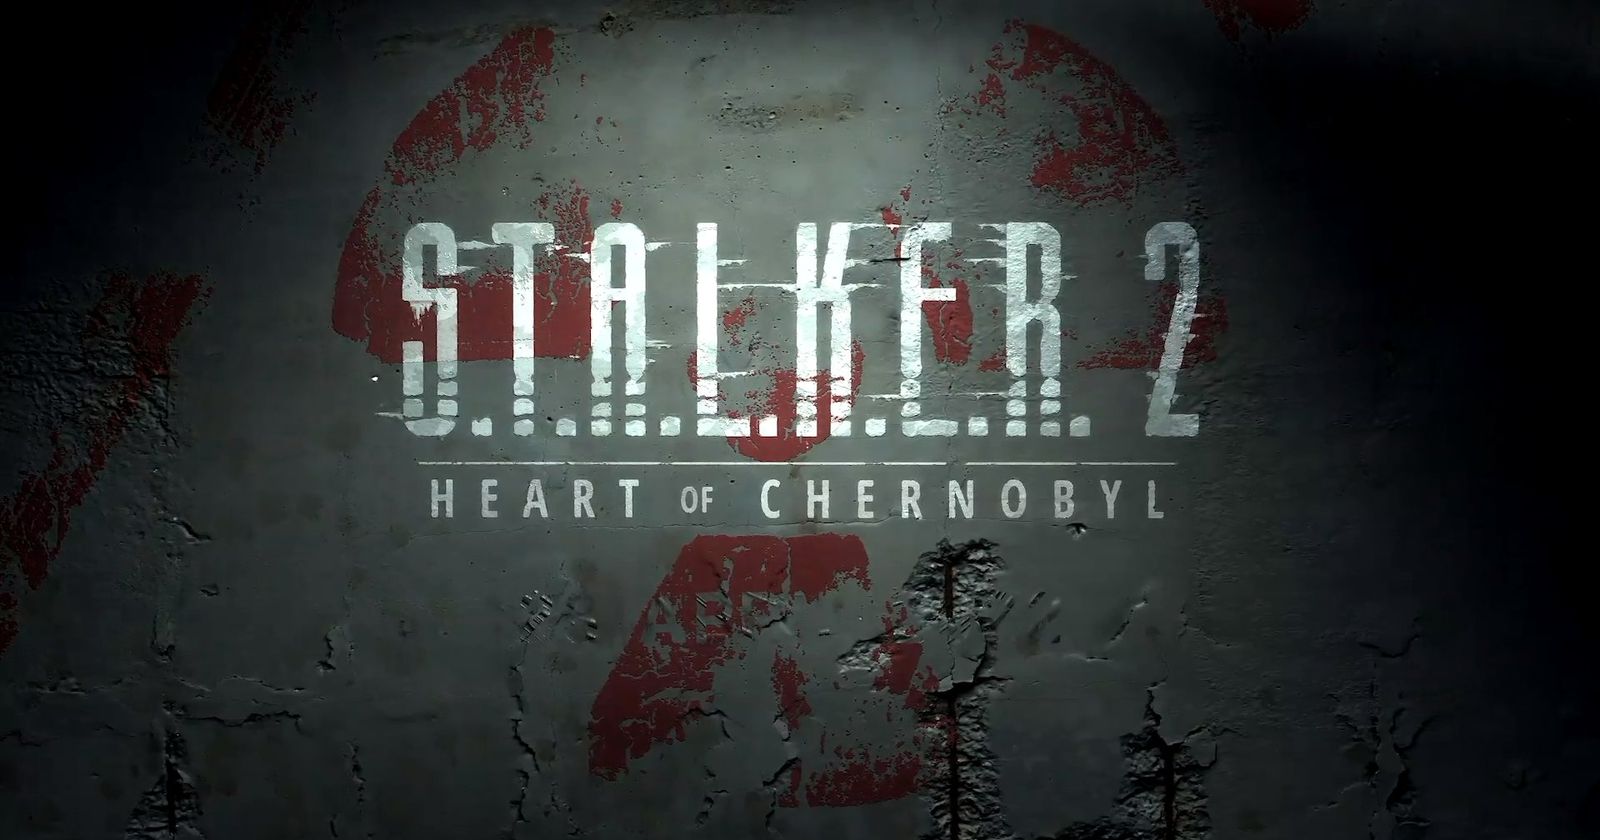 S.T.A.L.K.E.R. 2 is Impossible to Run on PS4 and Xbox One